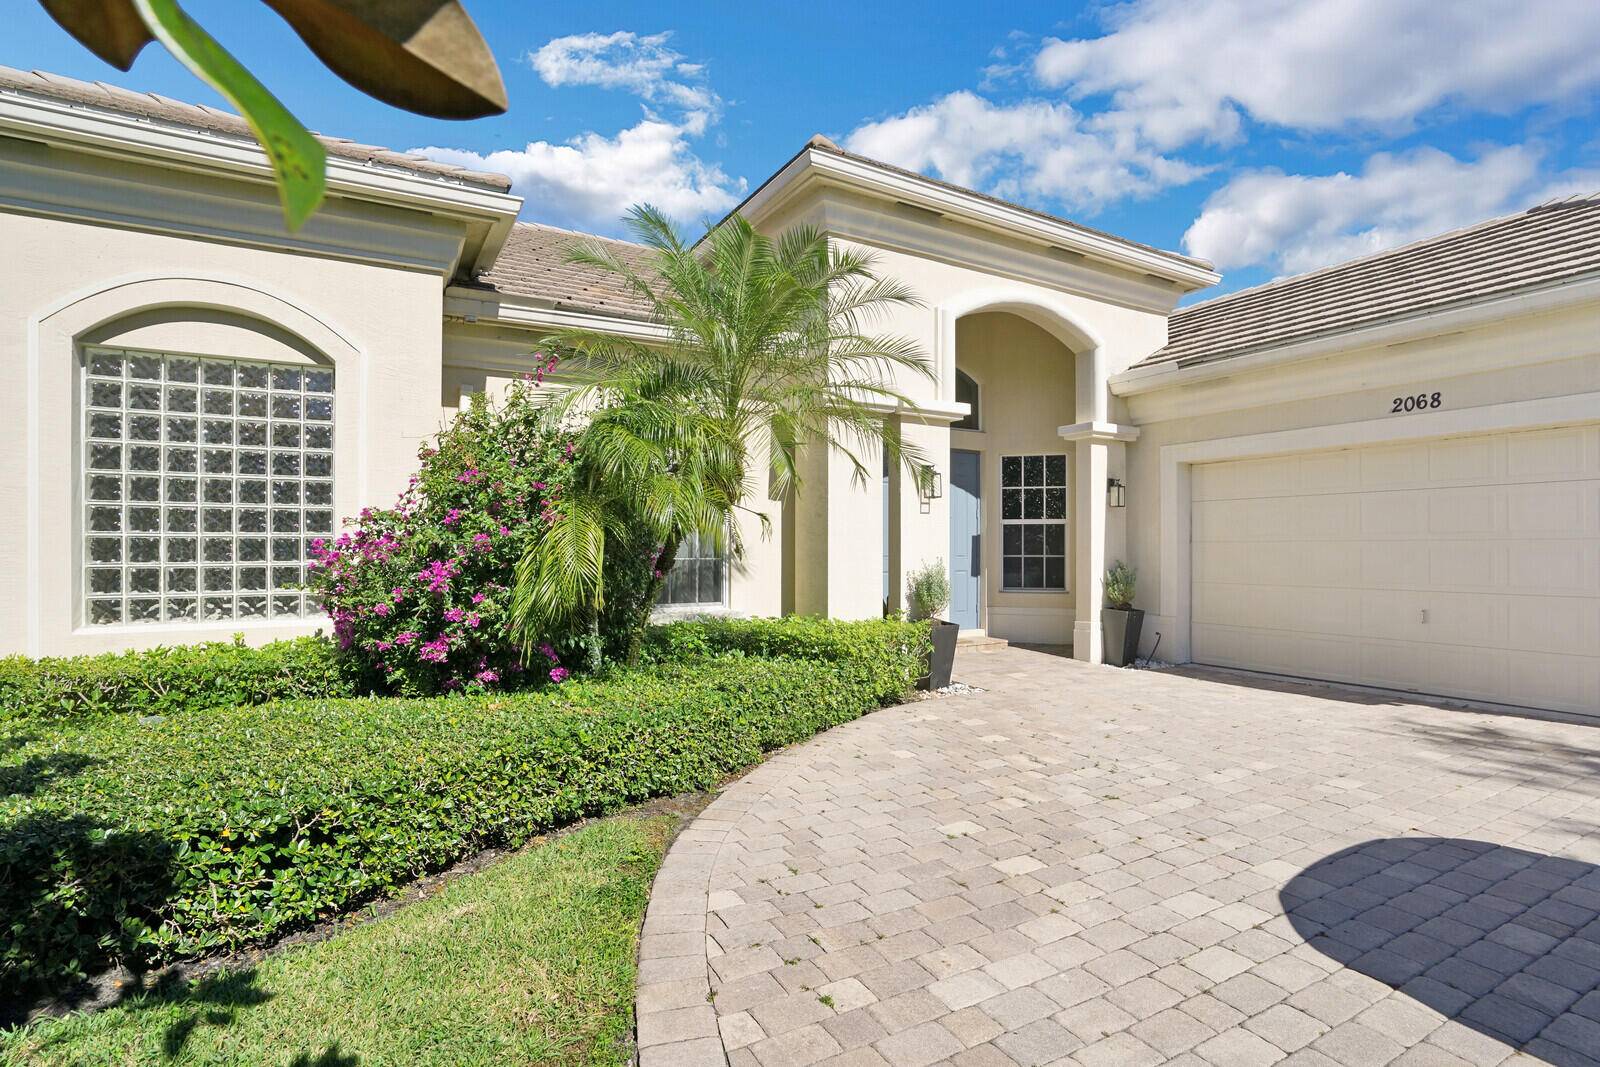 Just a moments drive from the east gate of the exclusive Palm Beach Polo Club, this gorgeously remodeled 3 bedroom, 3 bathroom property is set up for convenience and easy ...